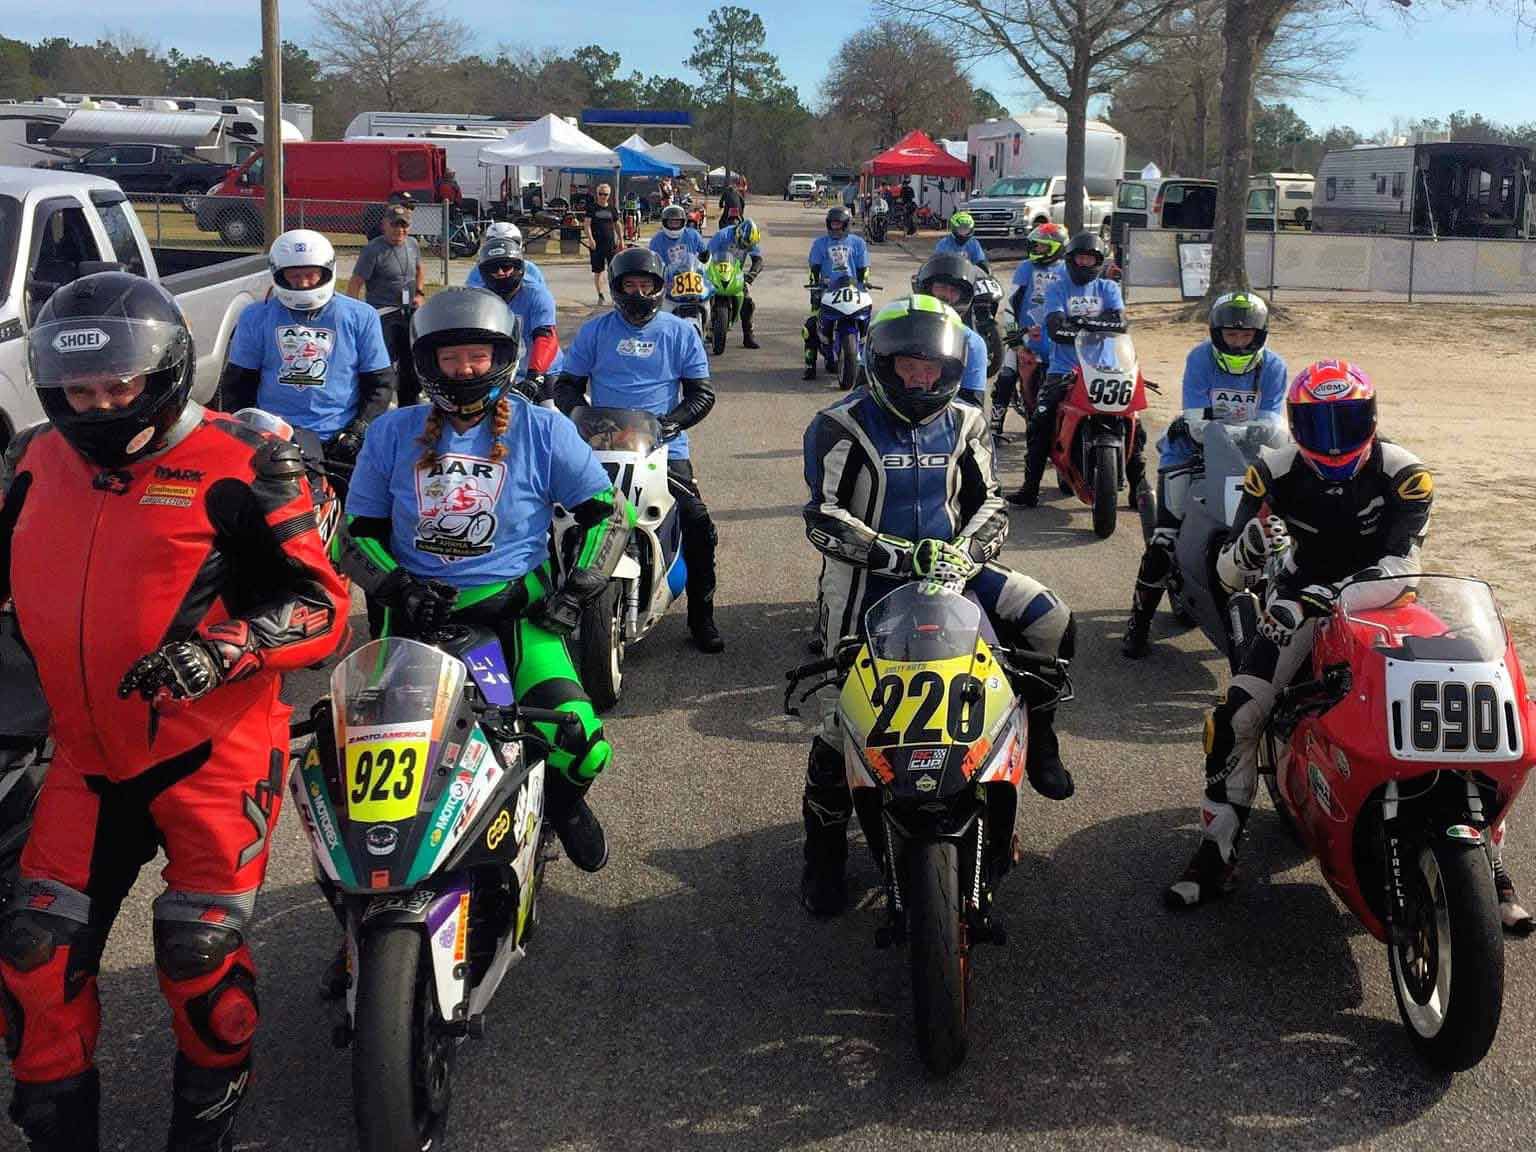 Mark Morrow (left) leads aspiring racers at this year’s race weekend at Carolina Motorsports Park.